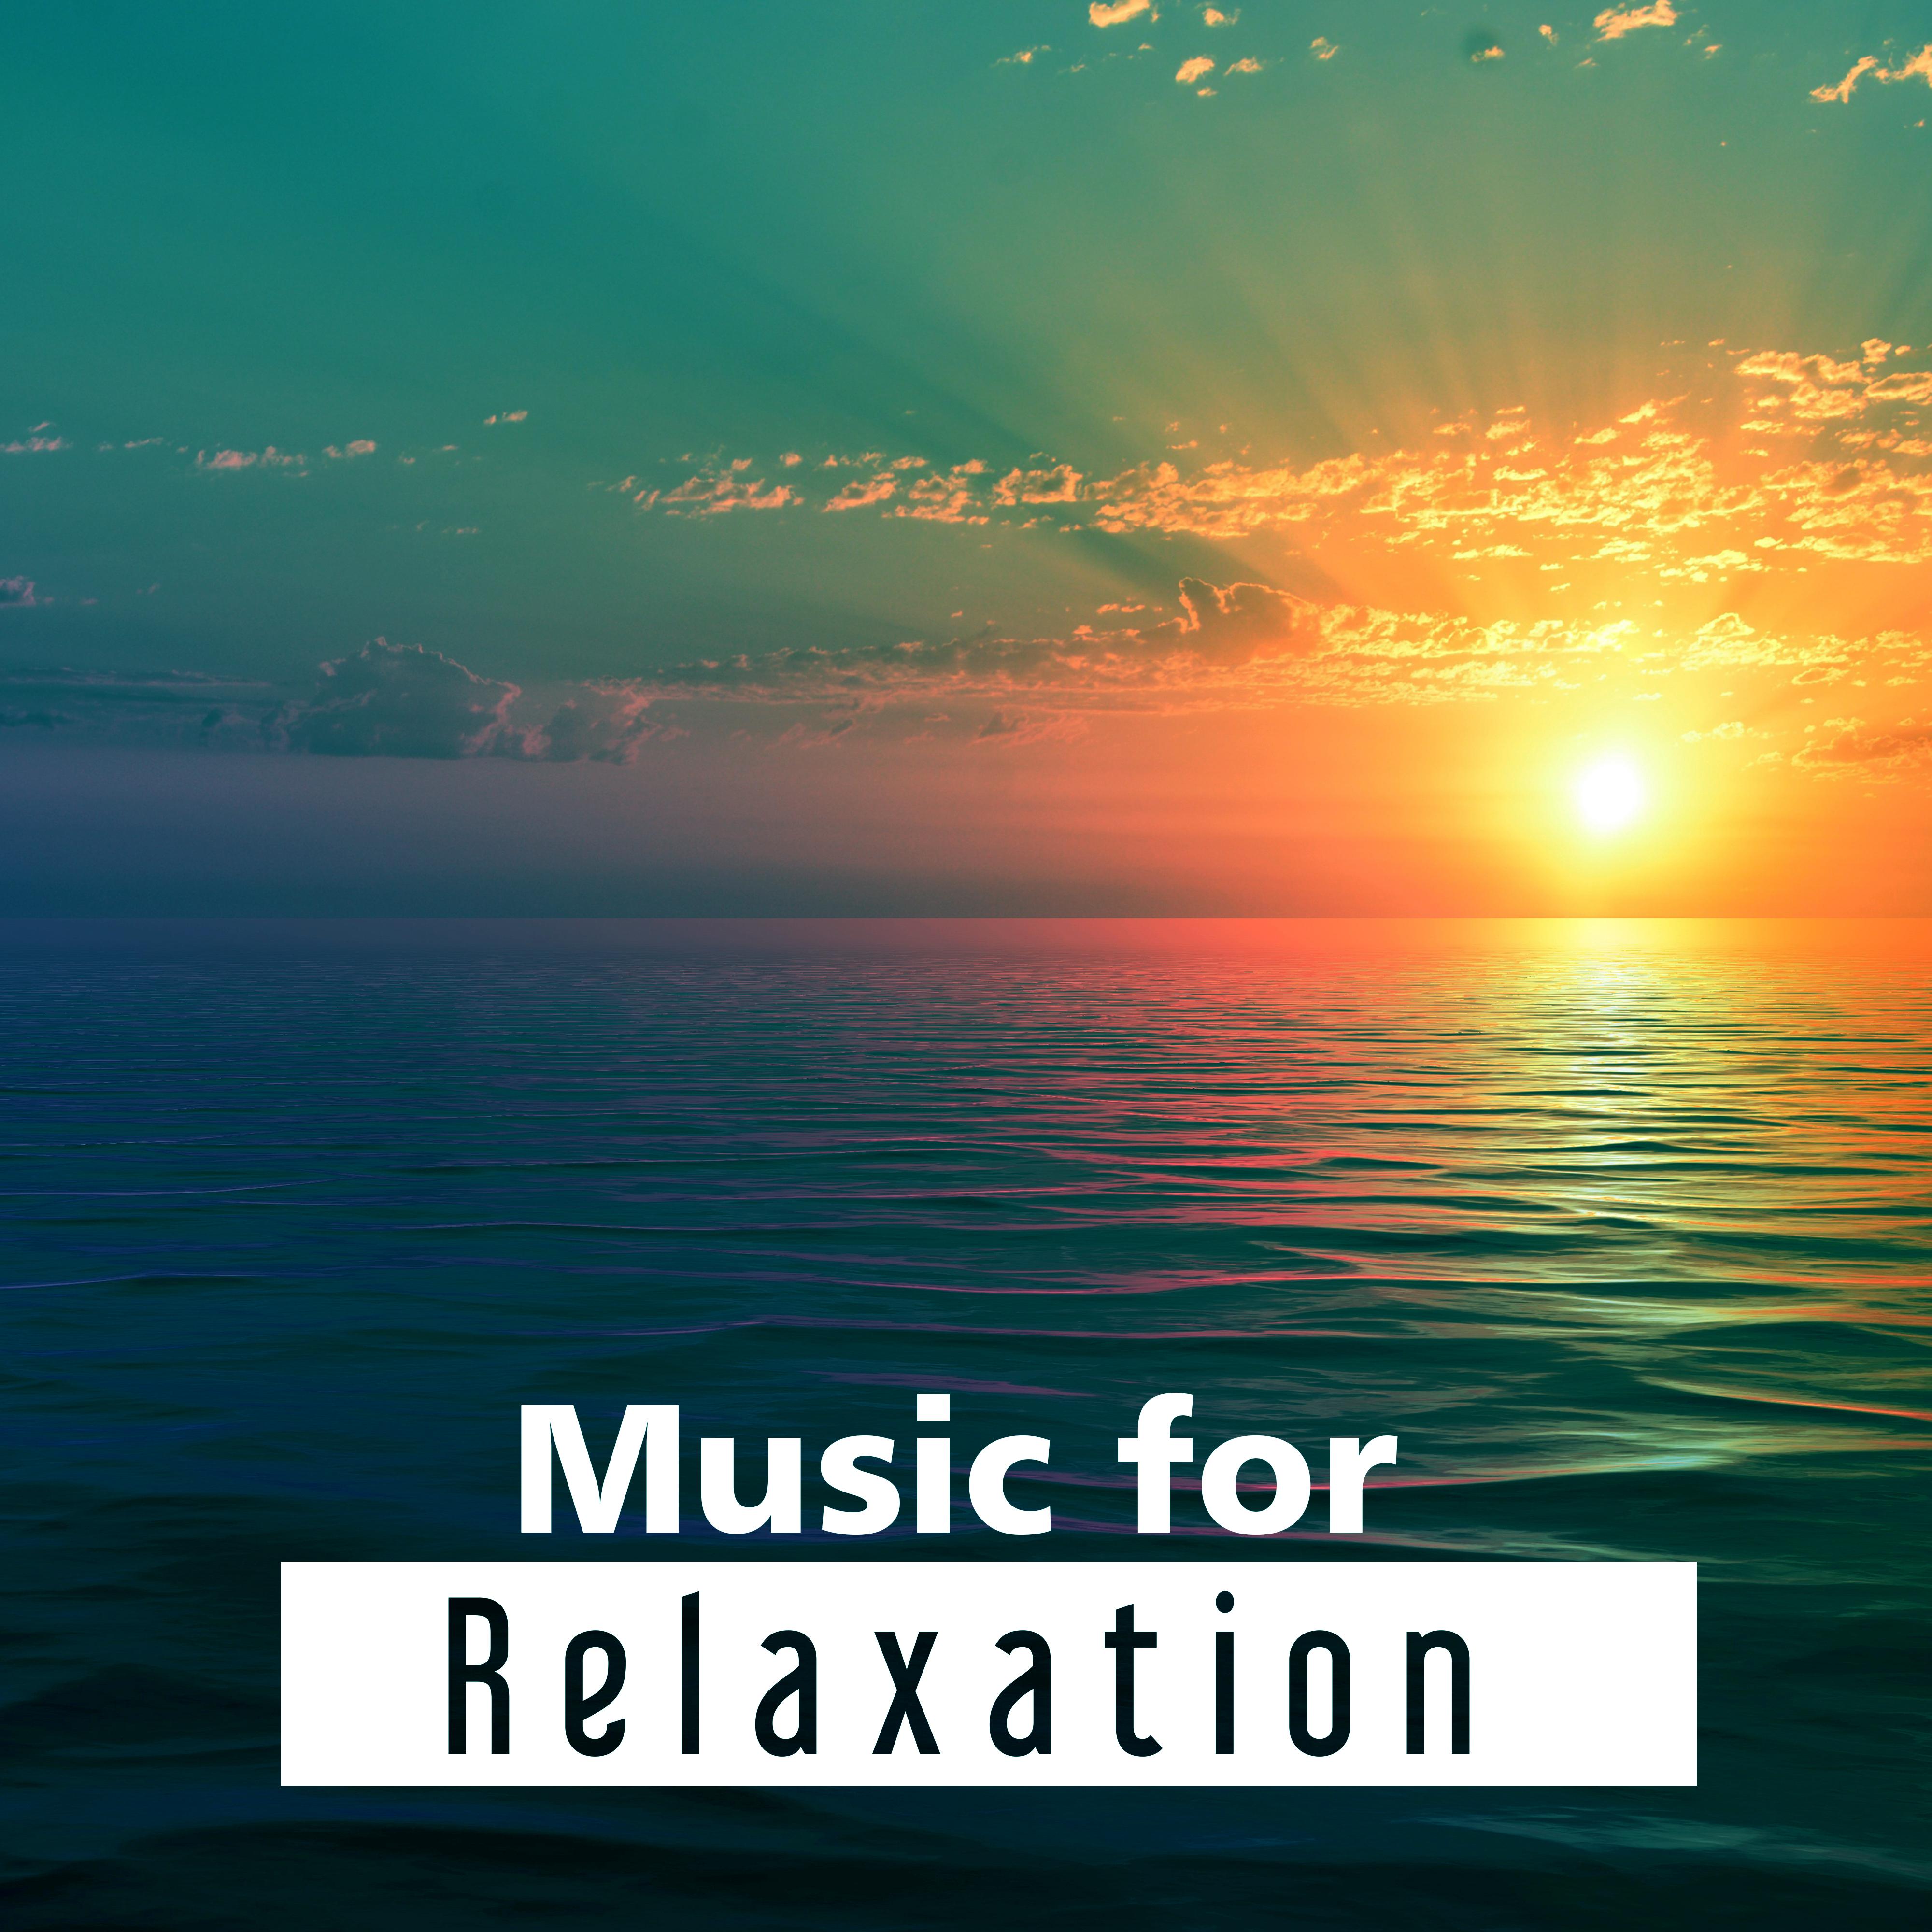 Music for Relaxation – Easy Listening, Beach Rest, Soft Chill Out Music, Tropical Island